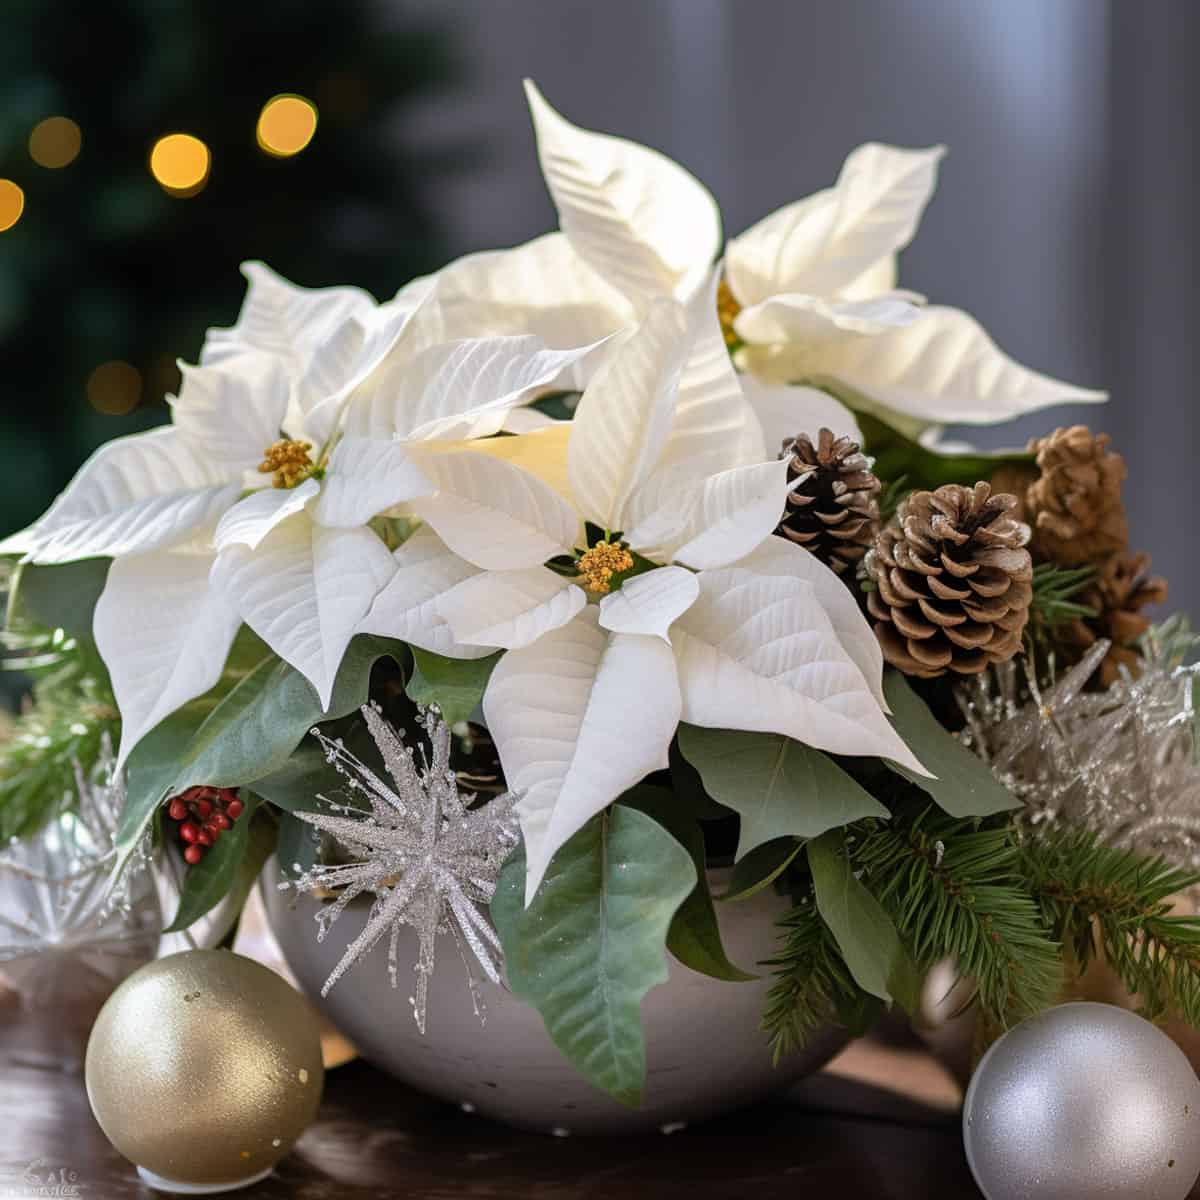 Up close photo of a white Poinsettia in a small bowl